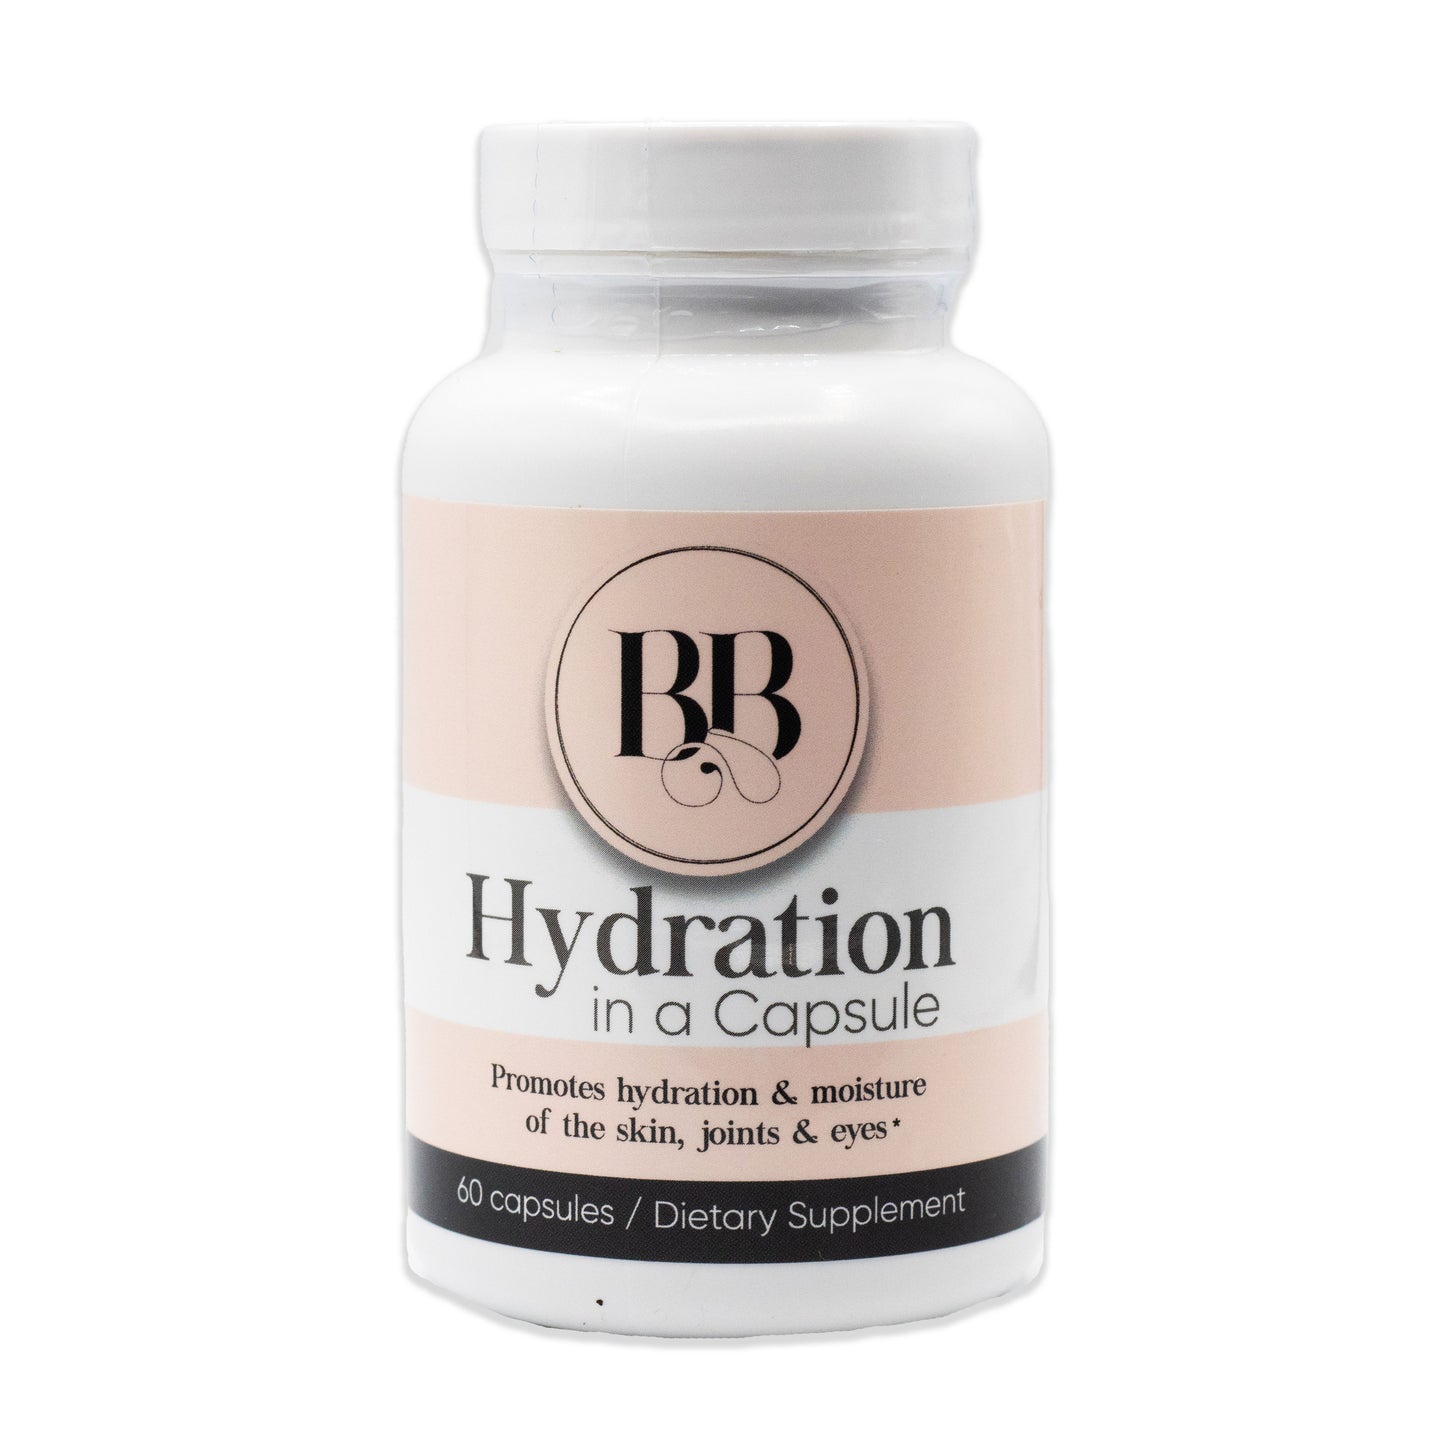 Hydration in a Capsule